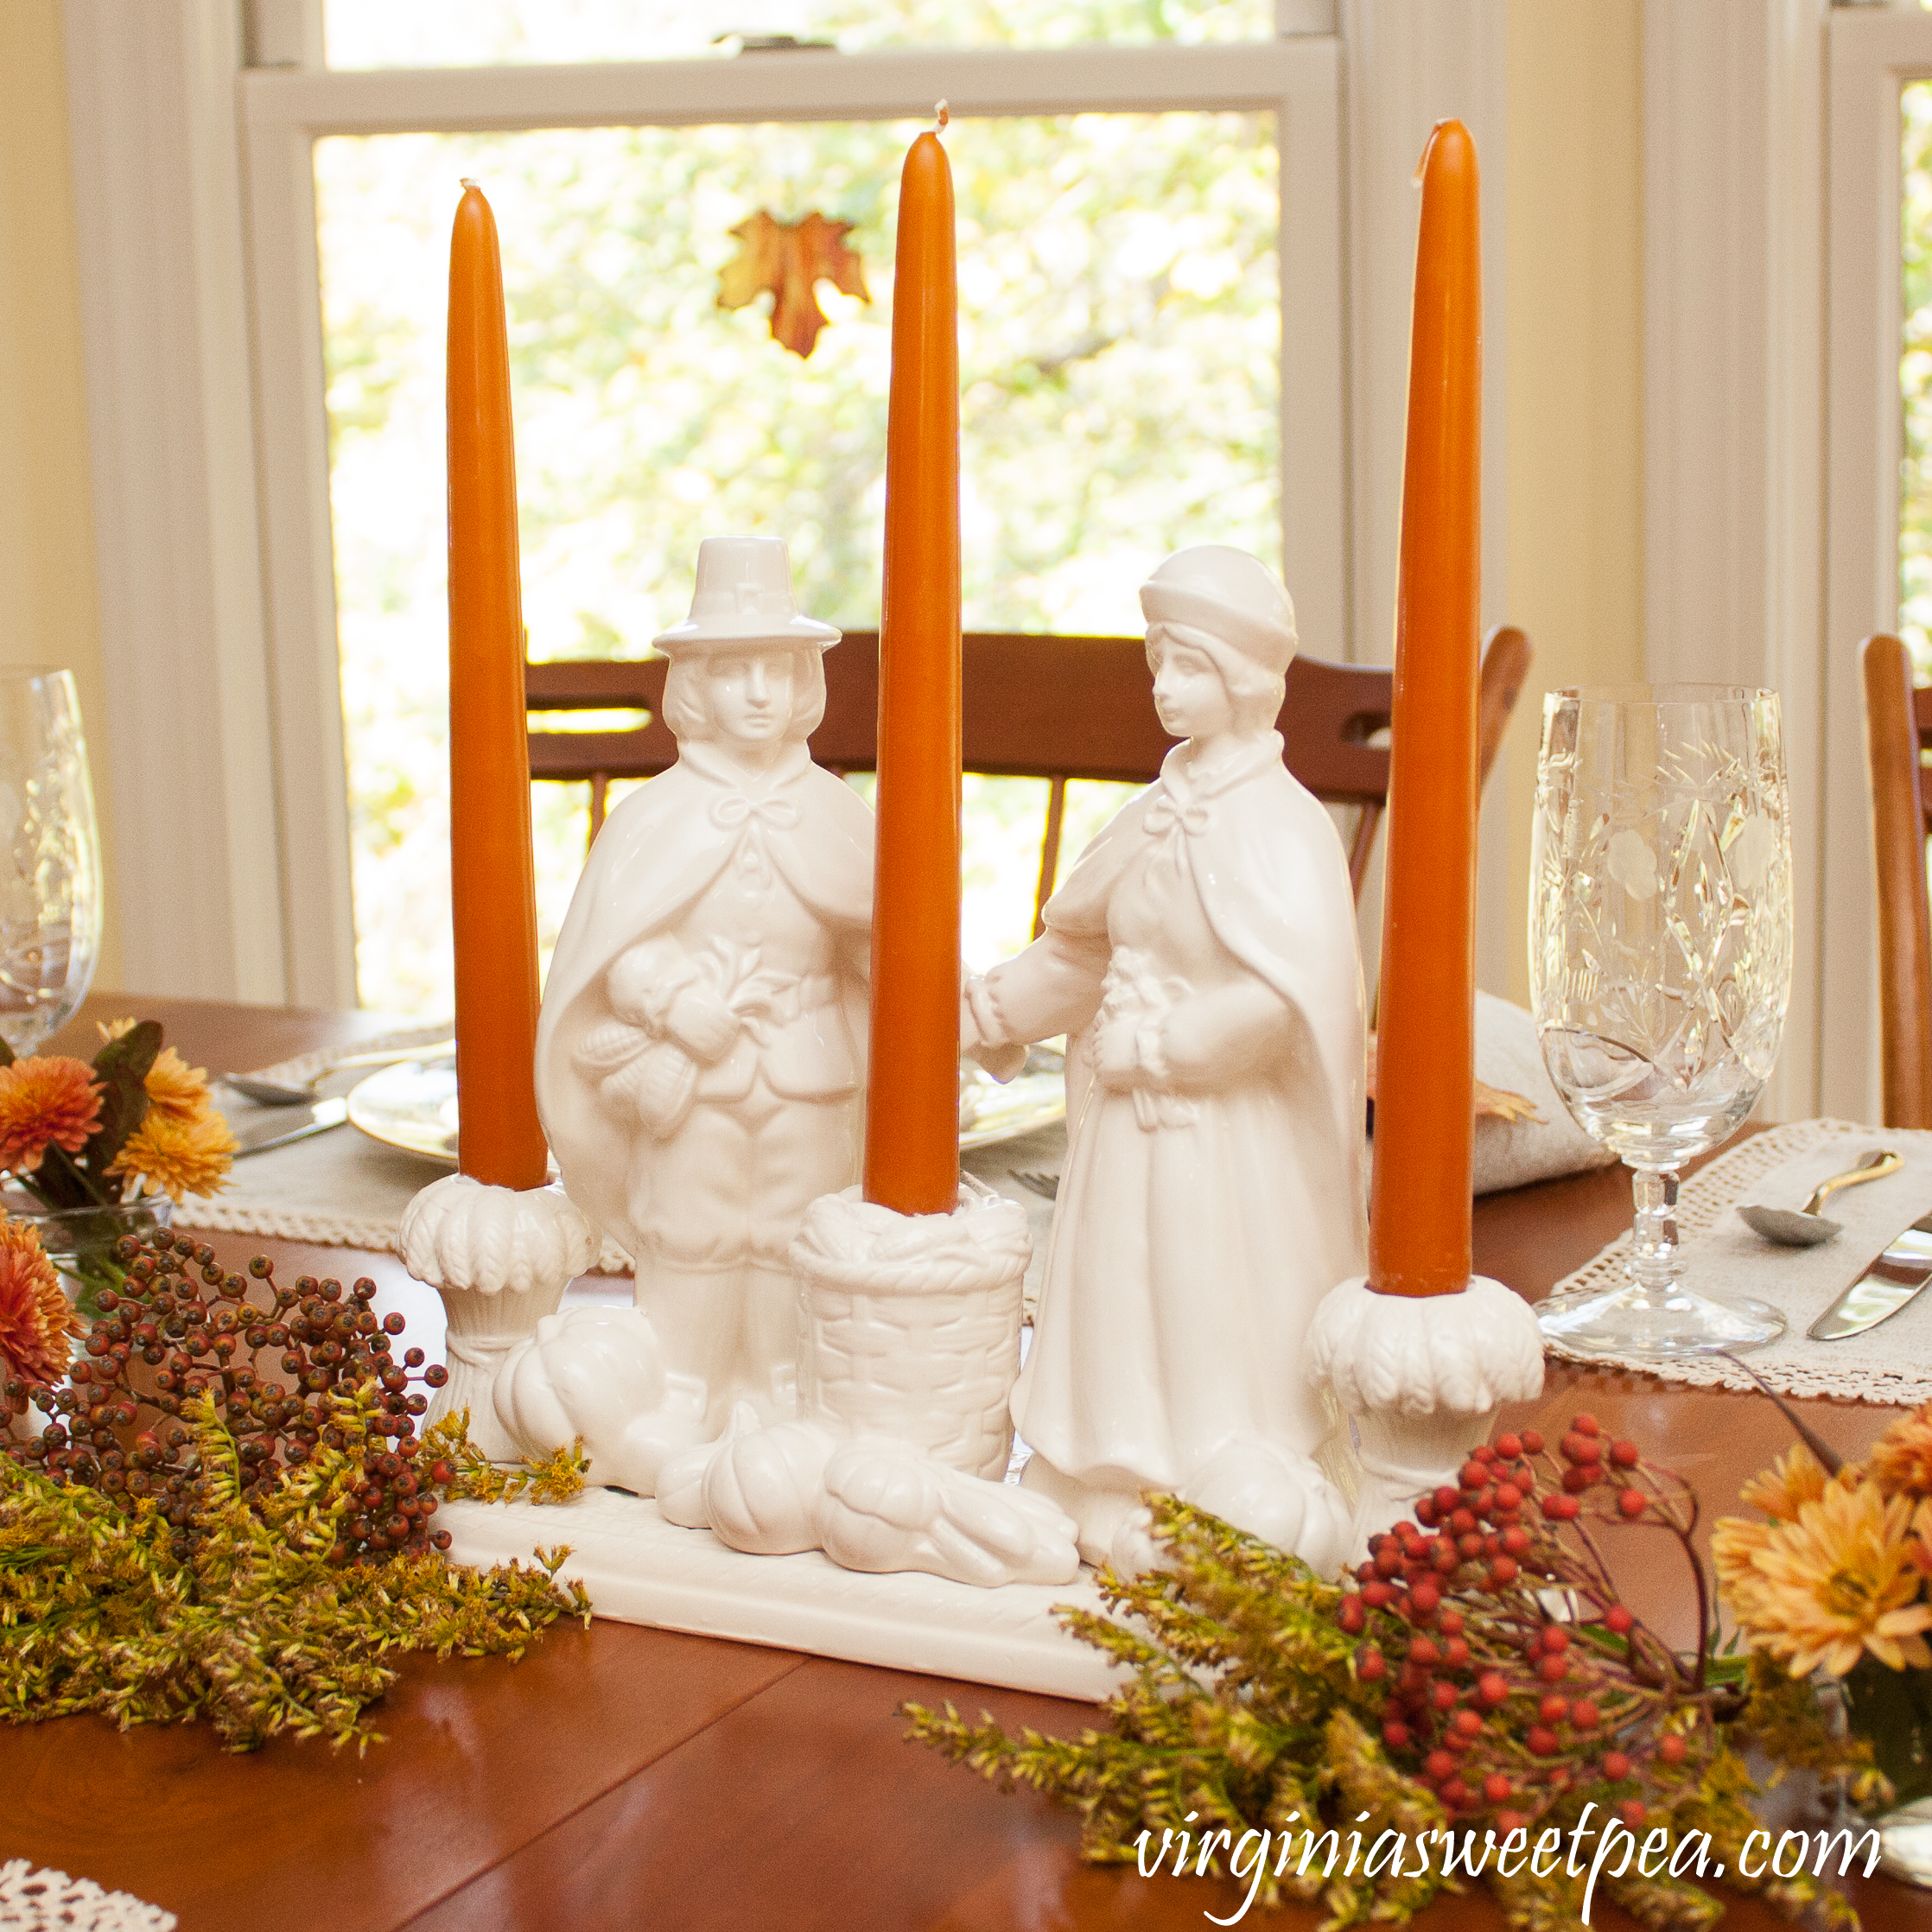 We Gather Together Thanksgiving Table - Get ideas for setting your table for Thanksgiving from 20+ bloggers. #thanksgivingcenterpiece #thanksgiving #vintagepilgrims